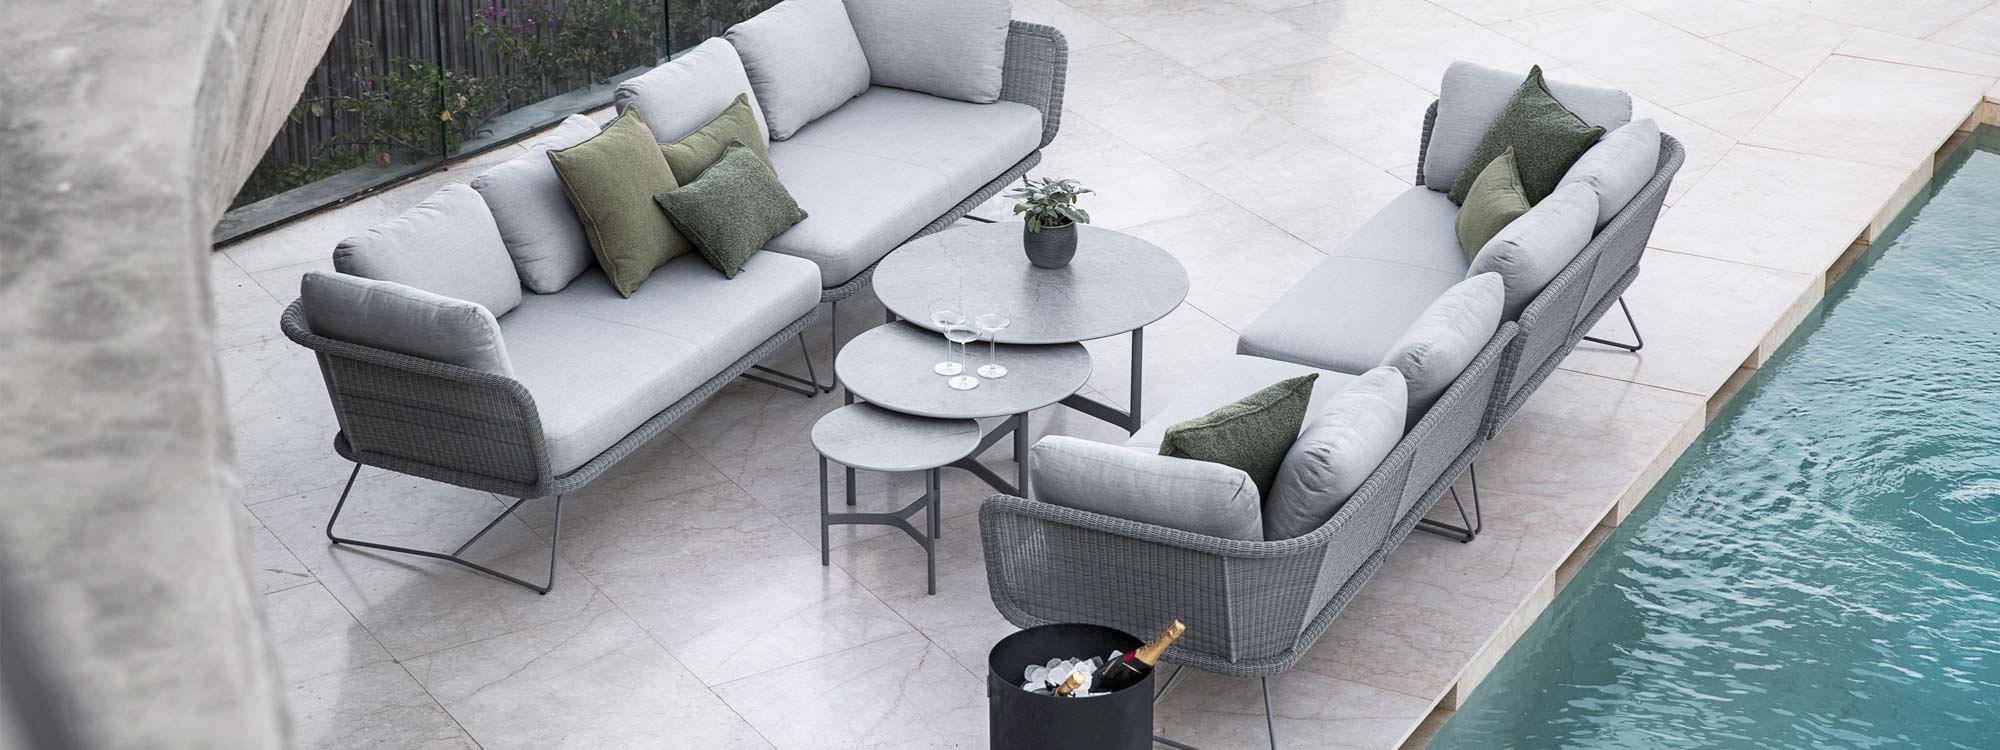 Image of pair of Horizon rattan garden sofas and light grey Twist outdoor low tables by Cane-line